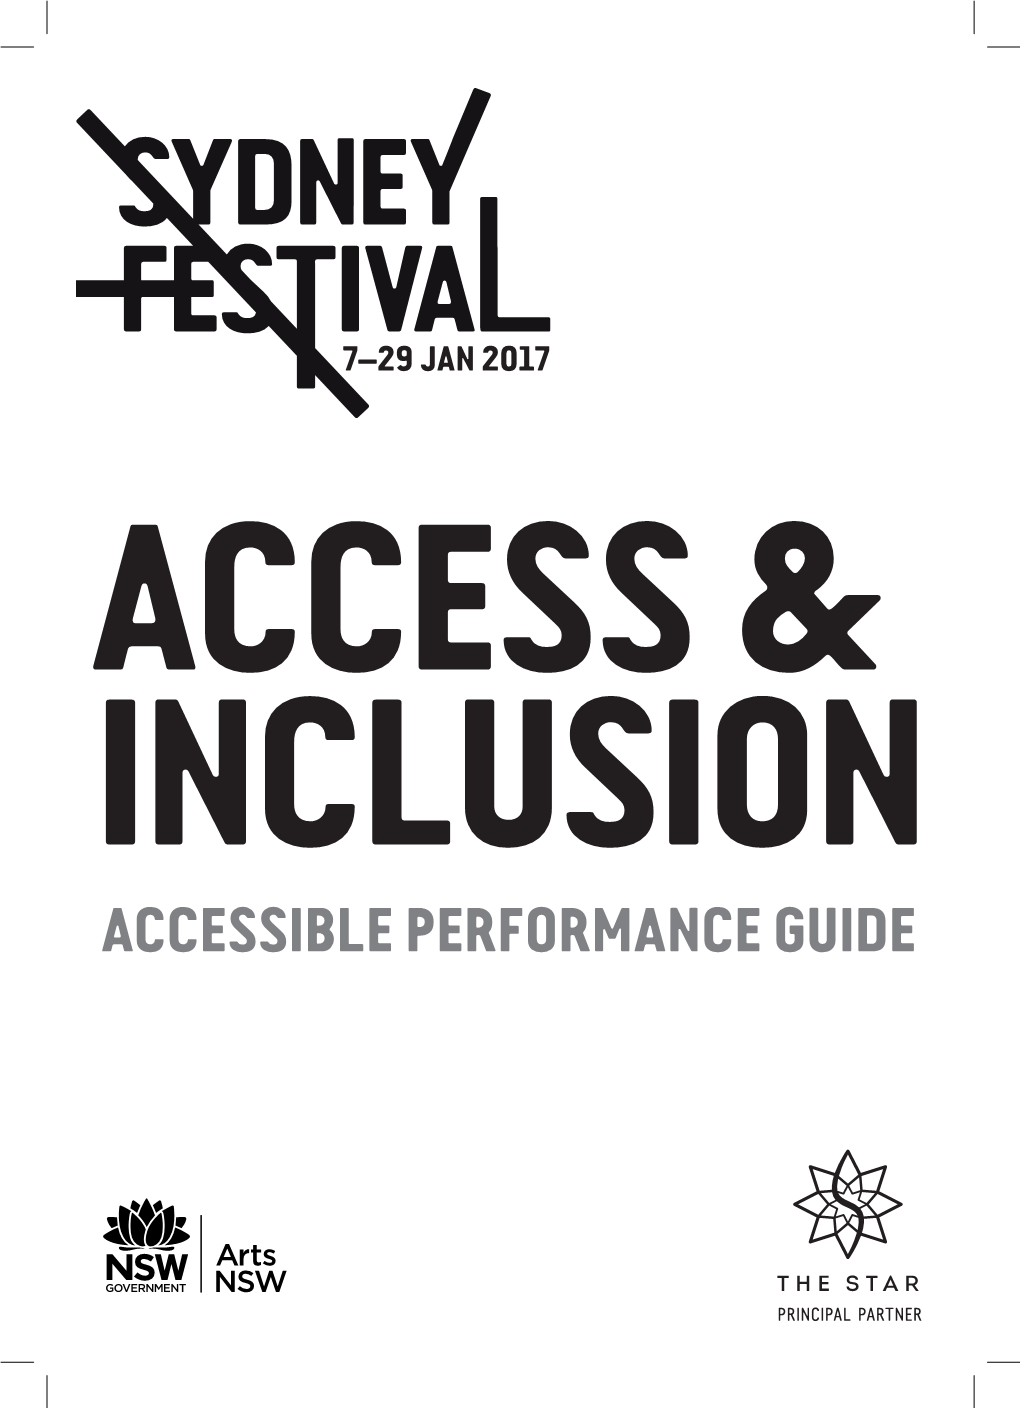 ACCESSIBLE PERFORMANCE GUIDE WELCOME We Welcome All Visitors to Sydney Festival Events and Make Every Effort to Ensure the Program Is Accessible to Our Whole Audience